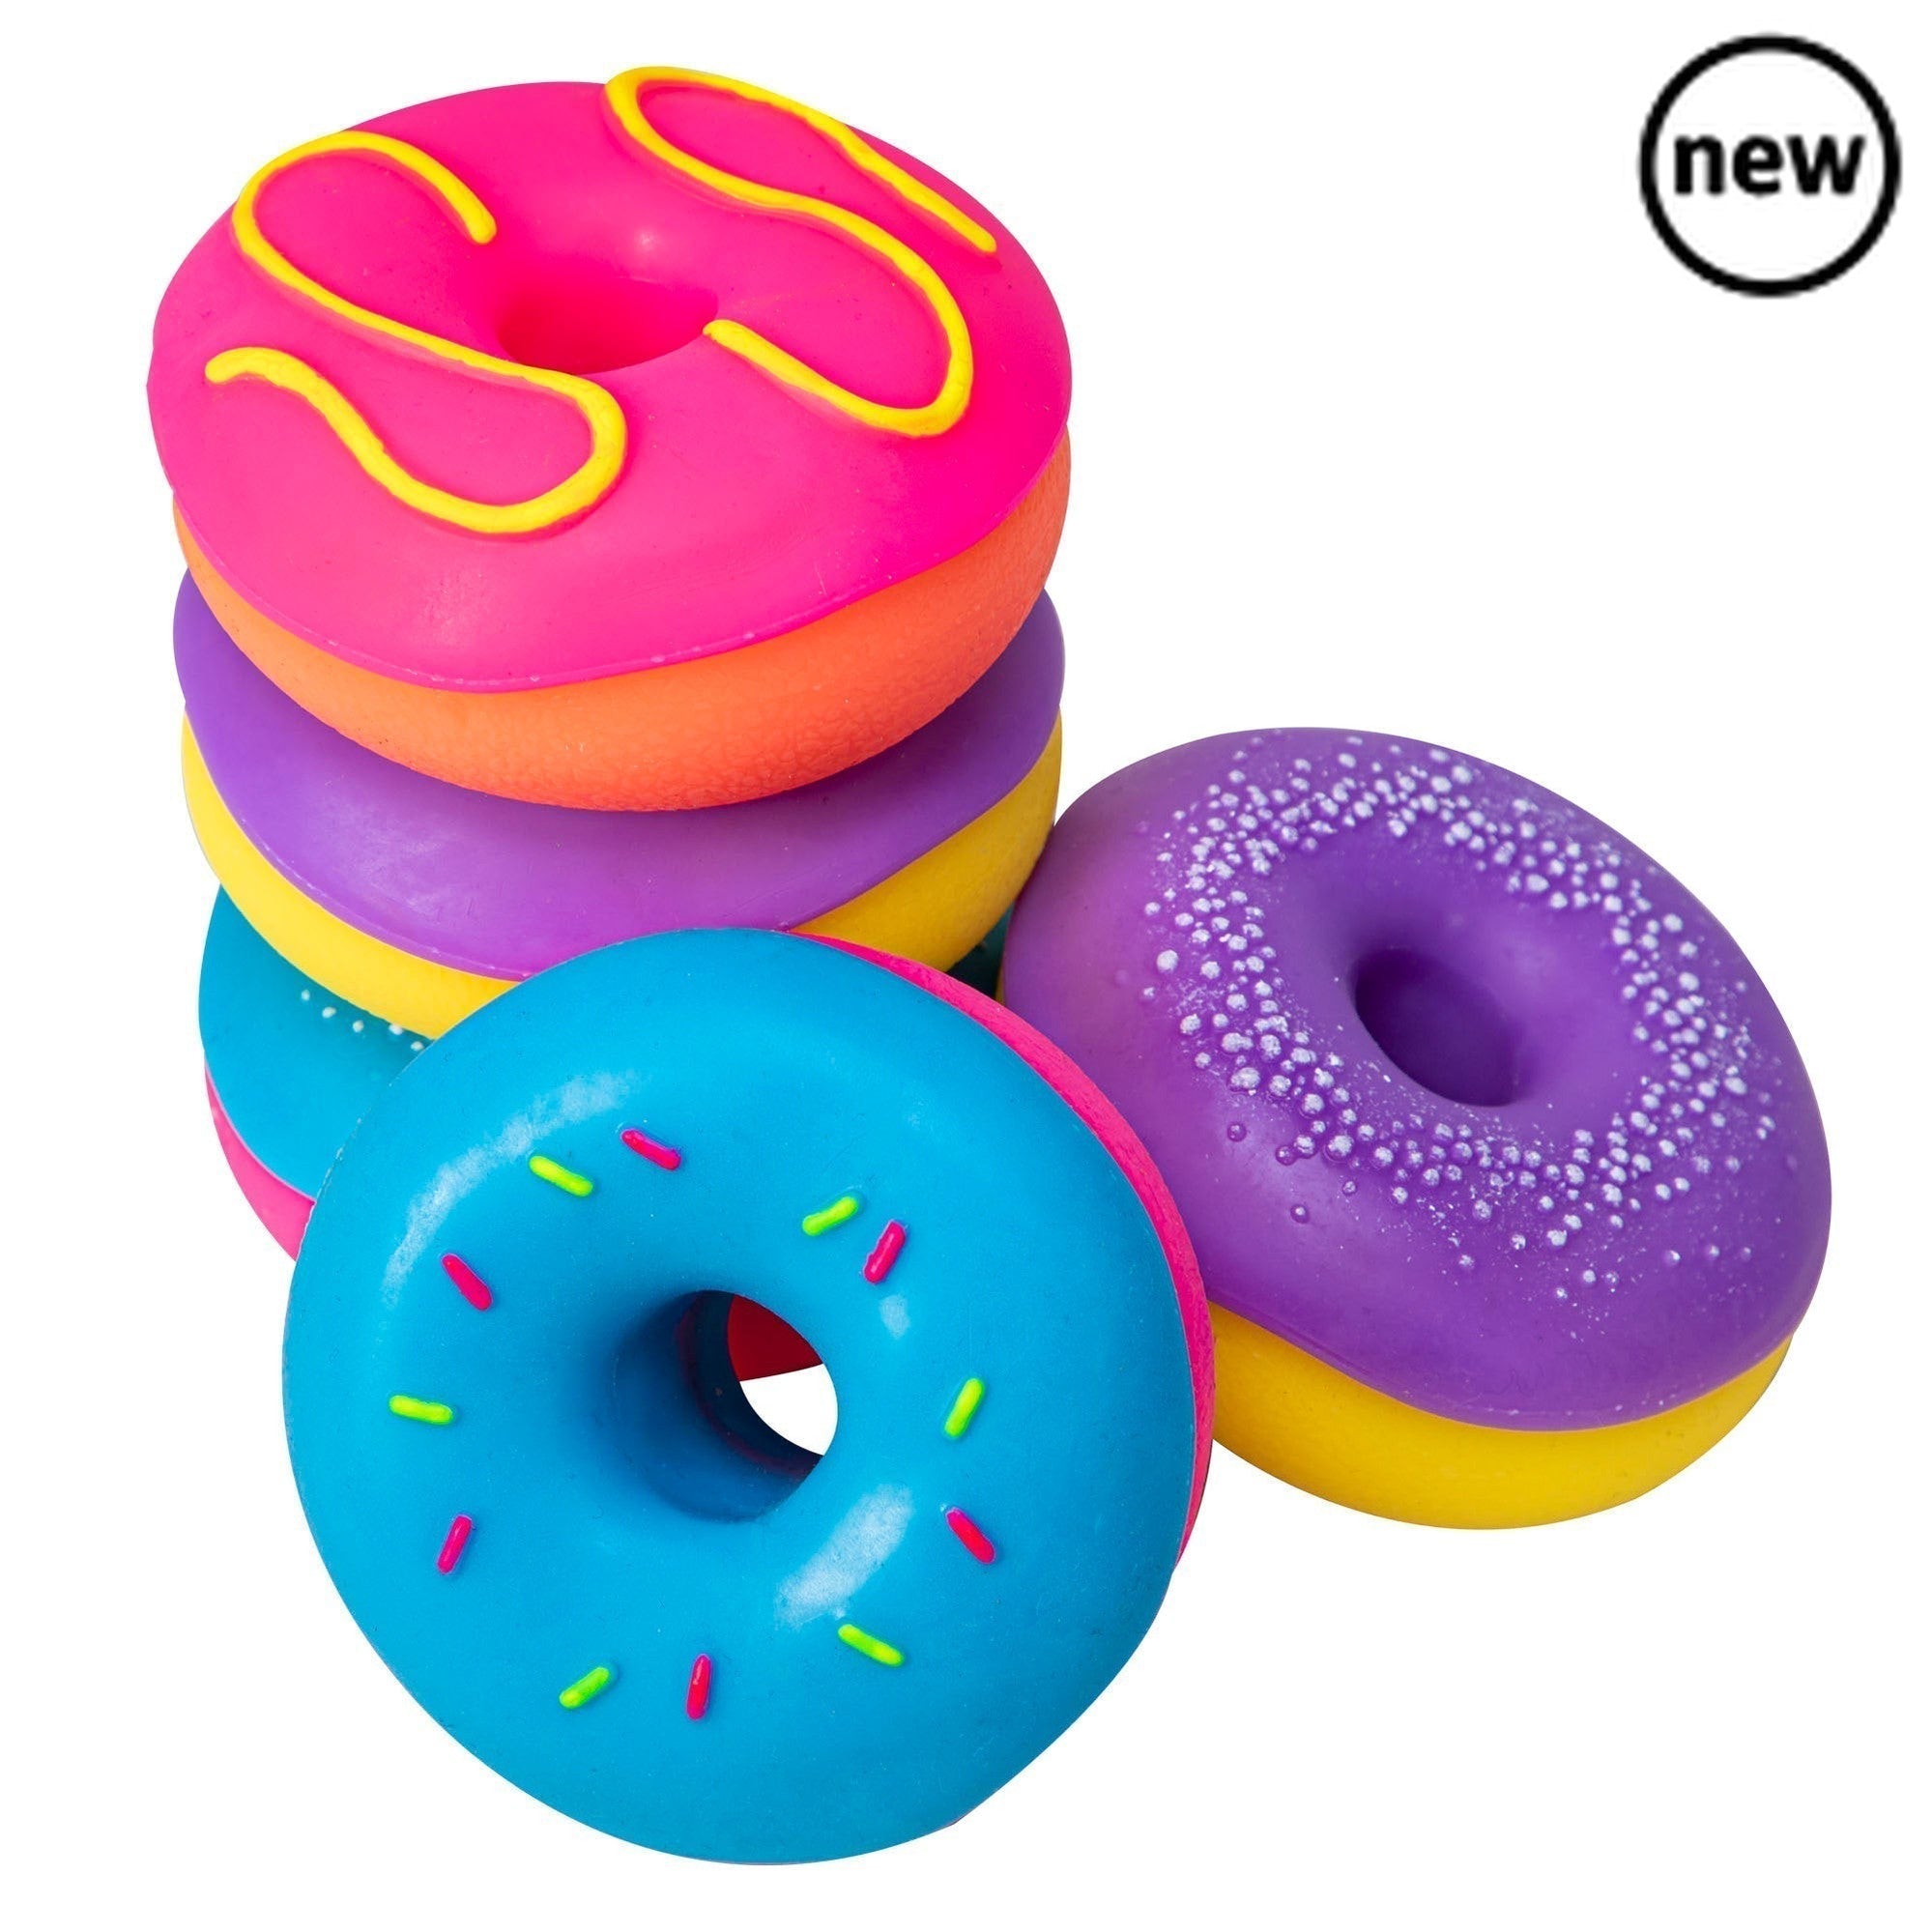 NeeDoh Donut, We ‘donut’ believe how cute this fidget toy is! NeeDoh Dohnuts are super sweet stress balls that almost looks good enough to eat (please note they are not edible). Comes in assorted colours (picked at random). Filled with a non-toxic dough material, squeeze stresses away. With swappable frosting, customise your Dohnut to make fun combinations. Squish it, stretch it and squash it for lots of NeeDoh ball fun. NeeDoh Donuts are great fidget toys, particularly appropriate for those with ADD, ADHD,